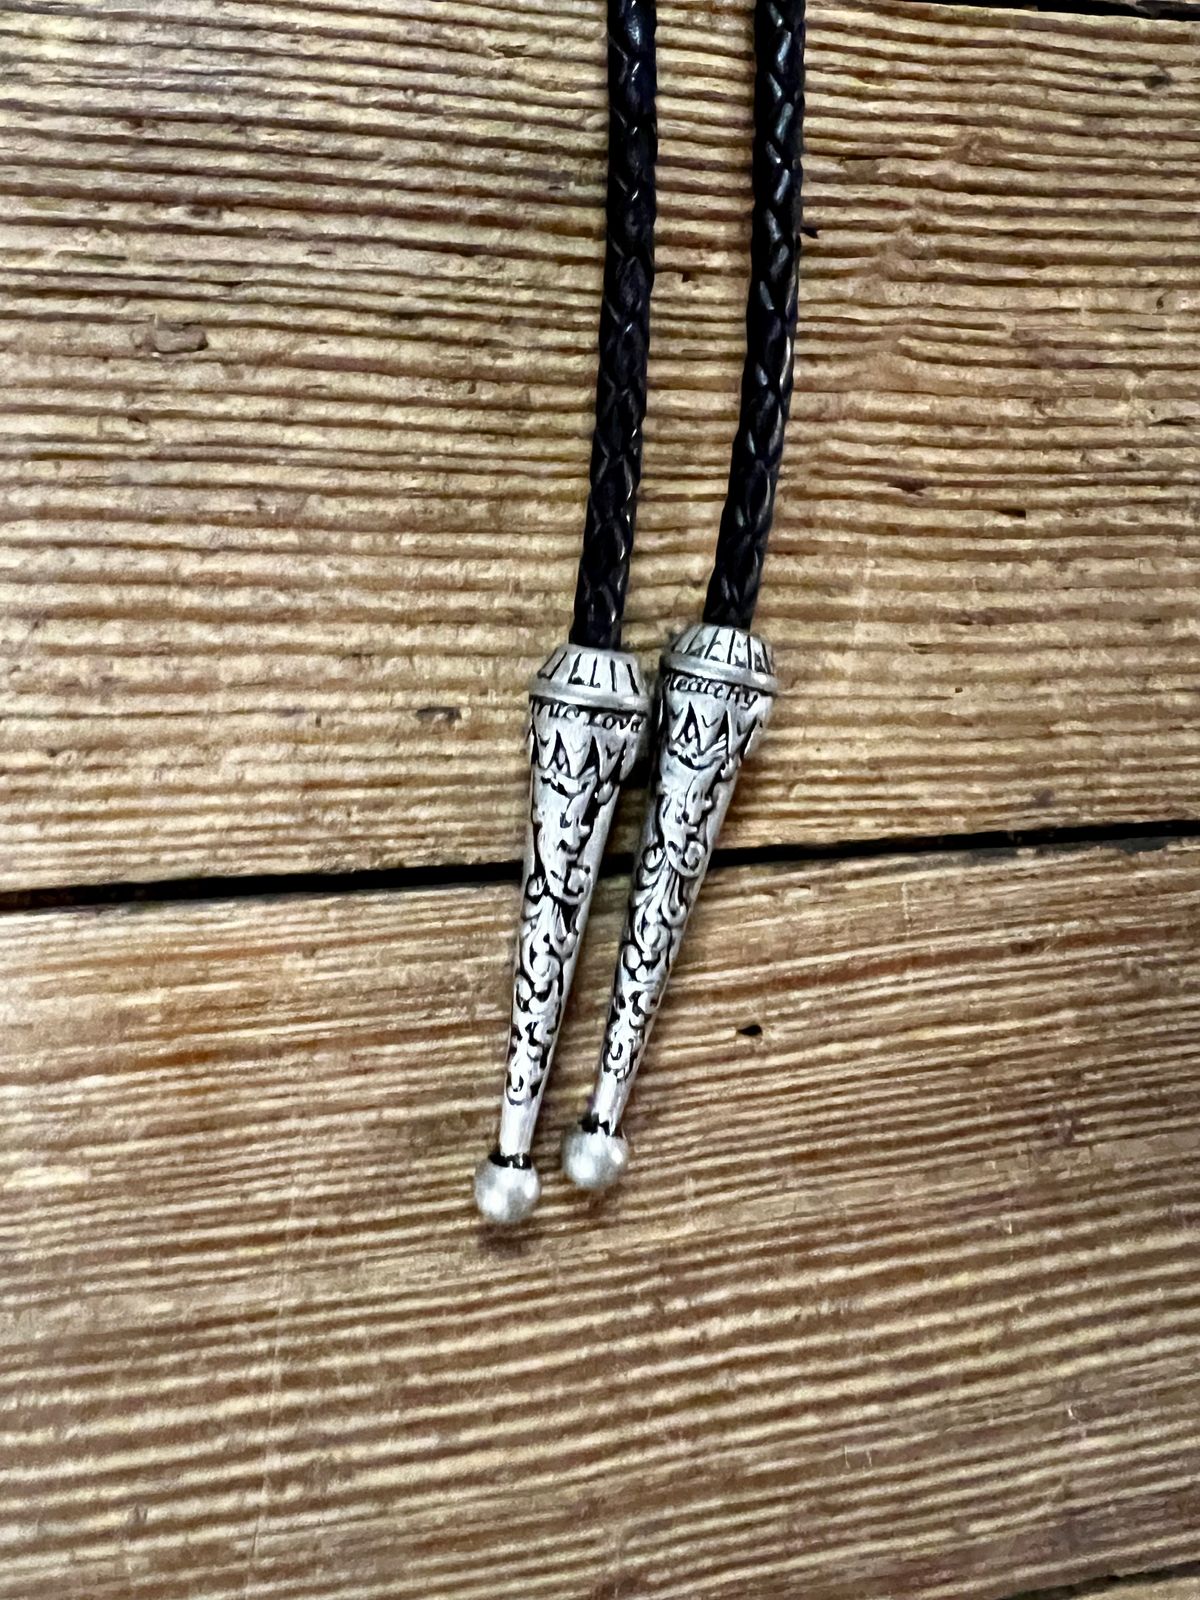 Victorian Gothic bolo tie with real prairie dog teeth, can be worn as Steampunk 